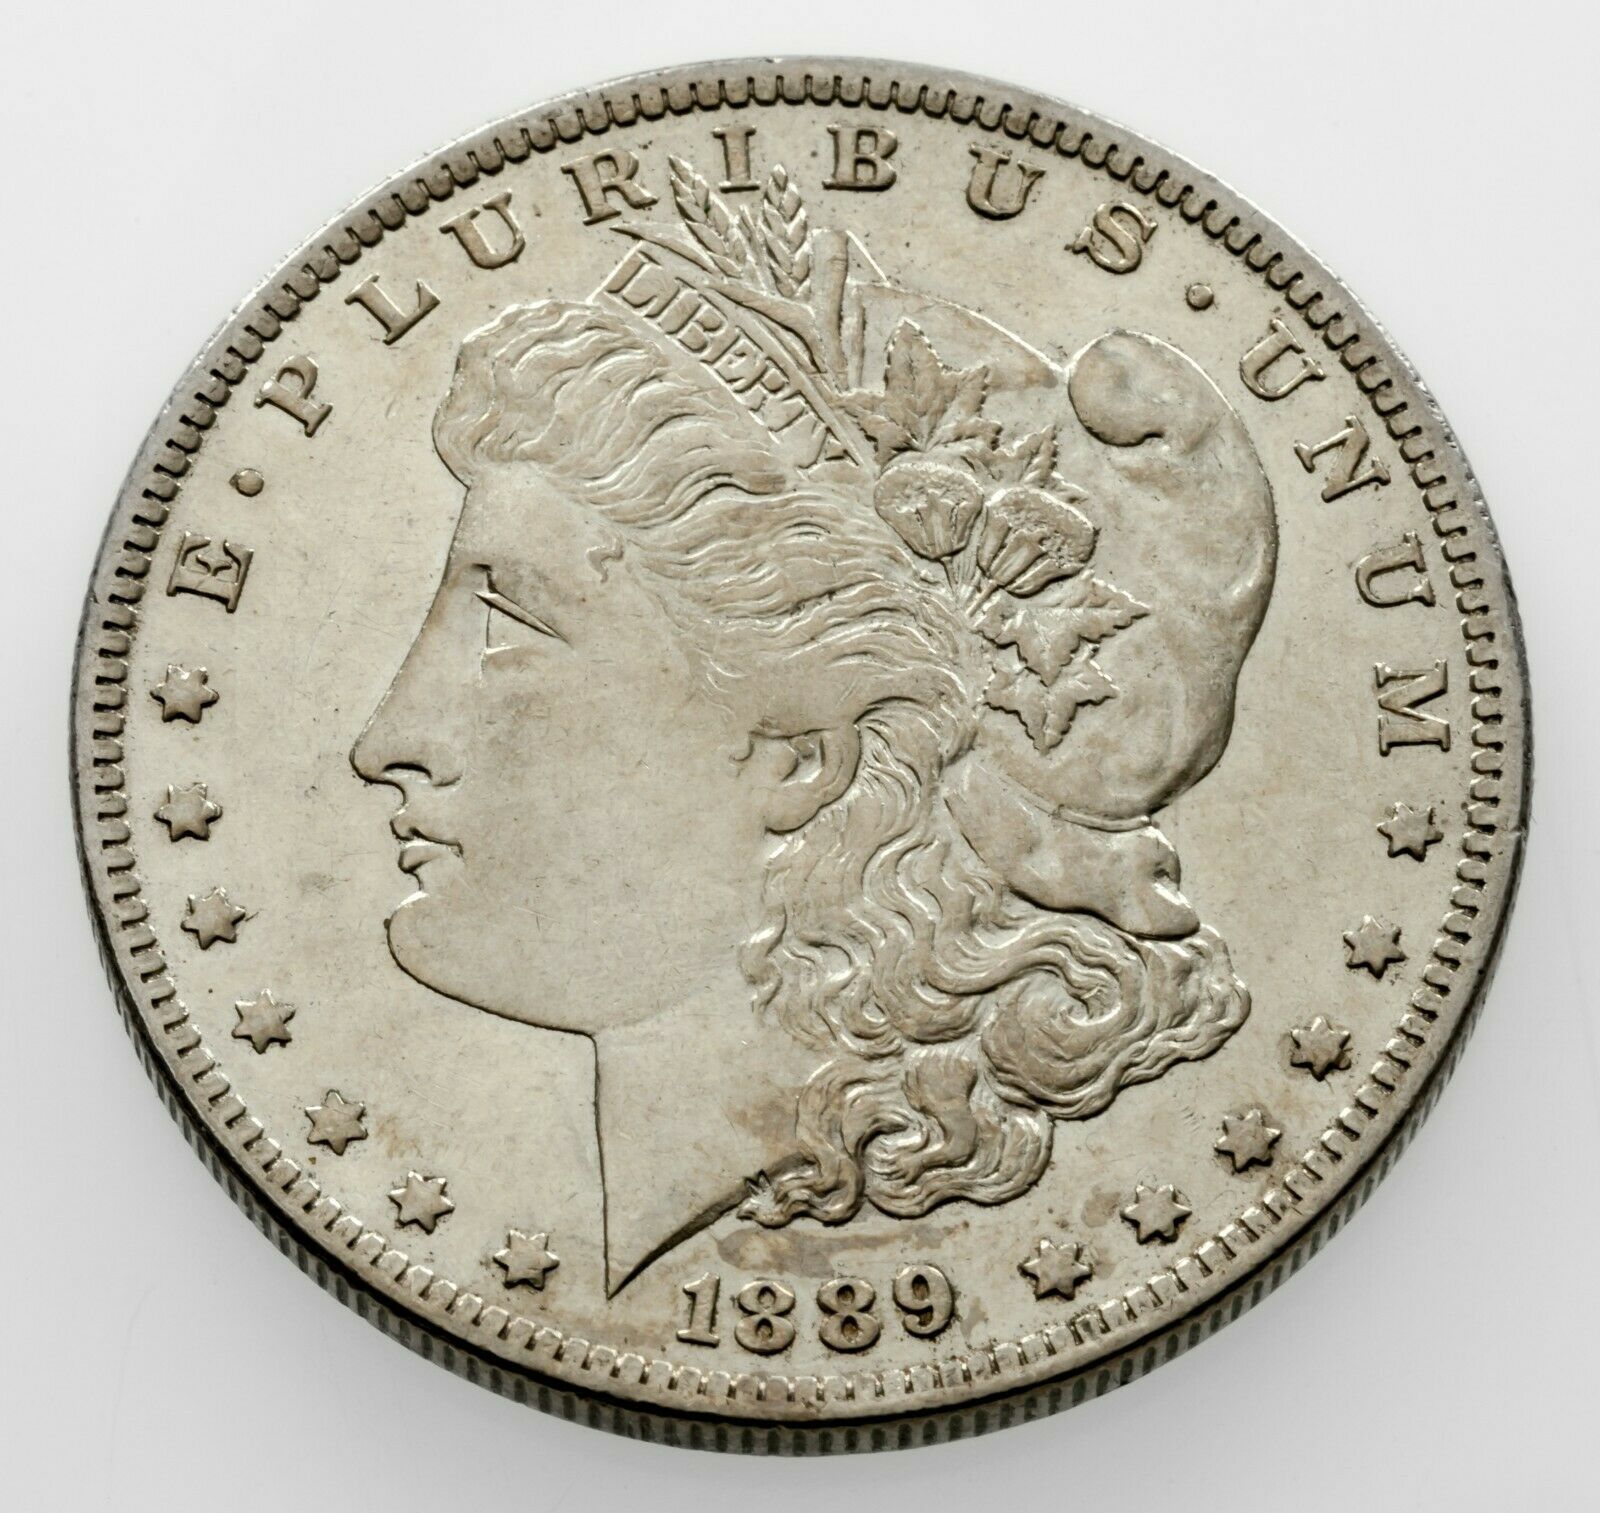 Primary image for 1889-O $1 Silver Morgan Dollar in AU Condition, Nice Eye Appeal!